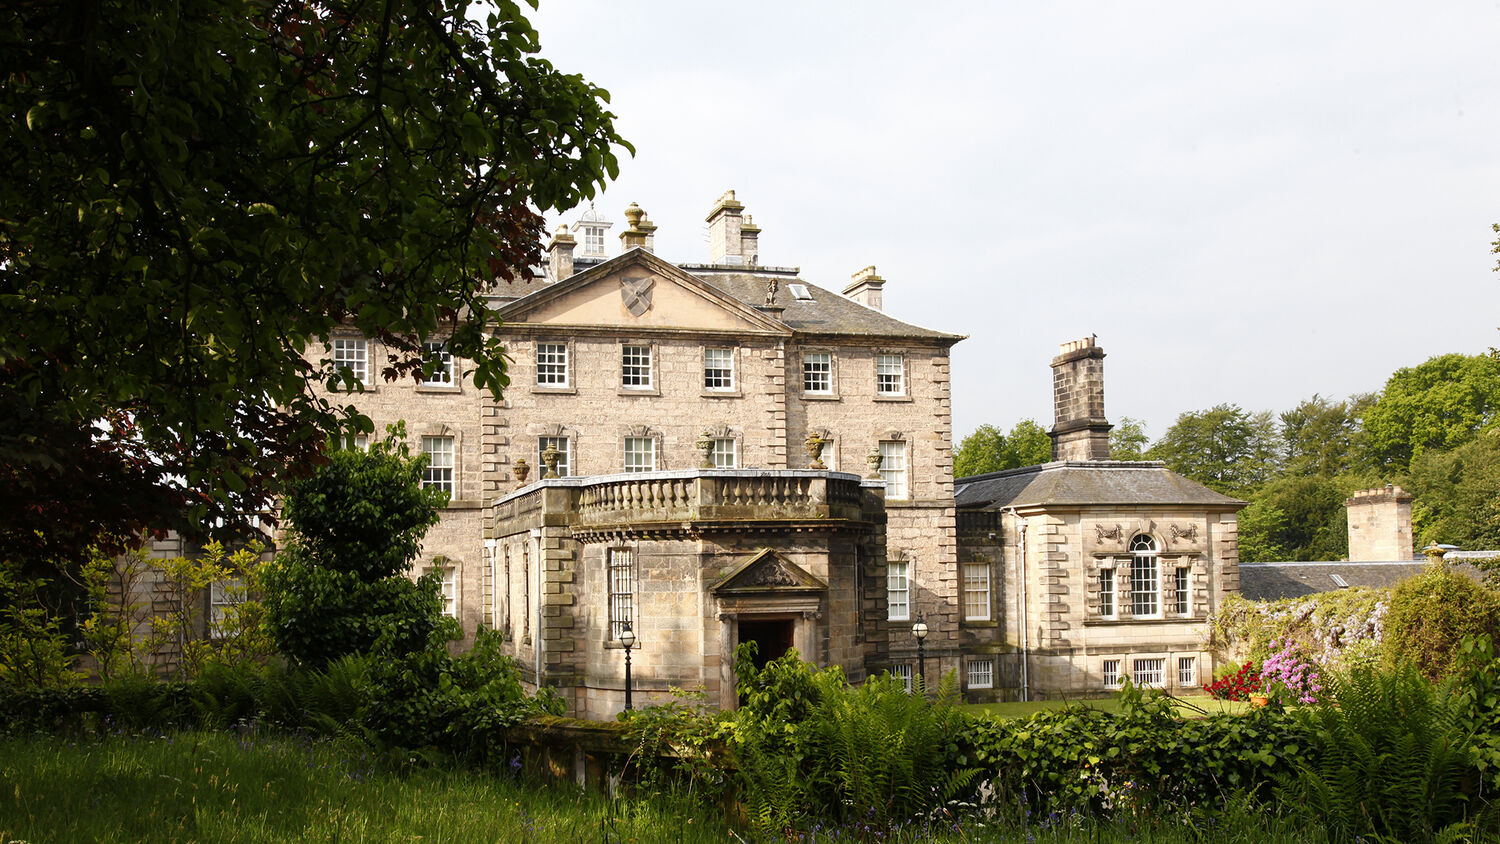 Pollok House is where discussions about the foundation of the Trust took place.